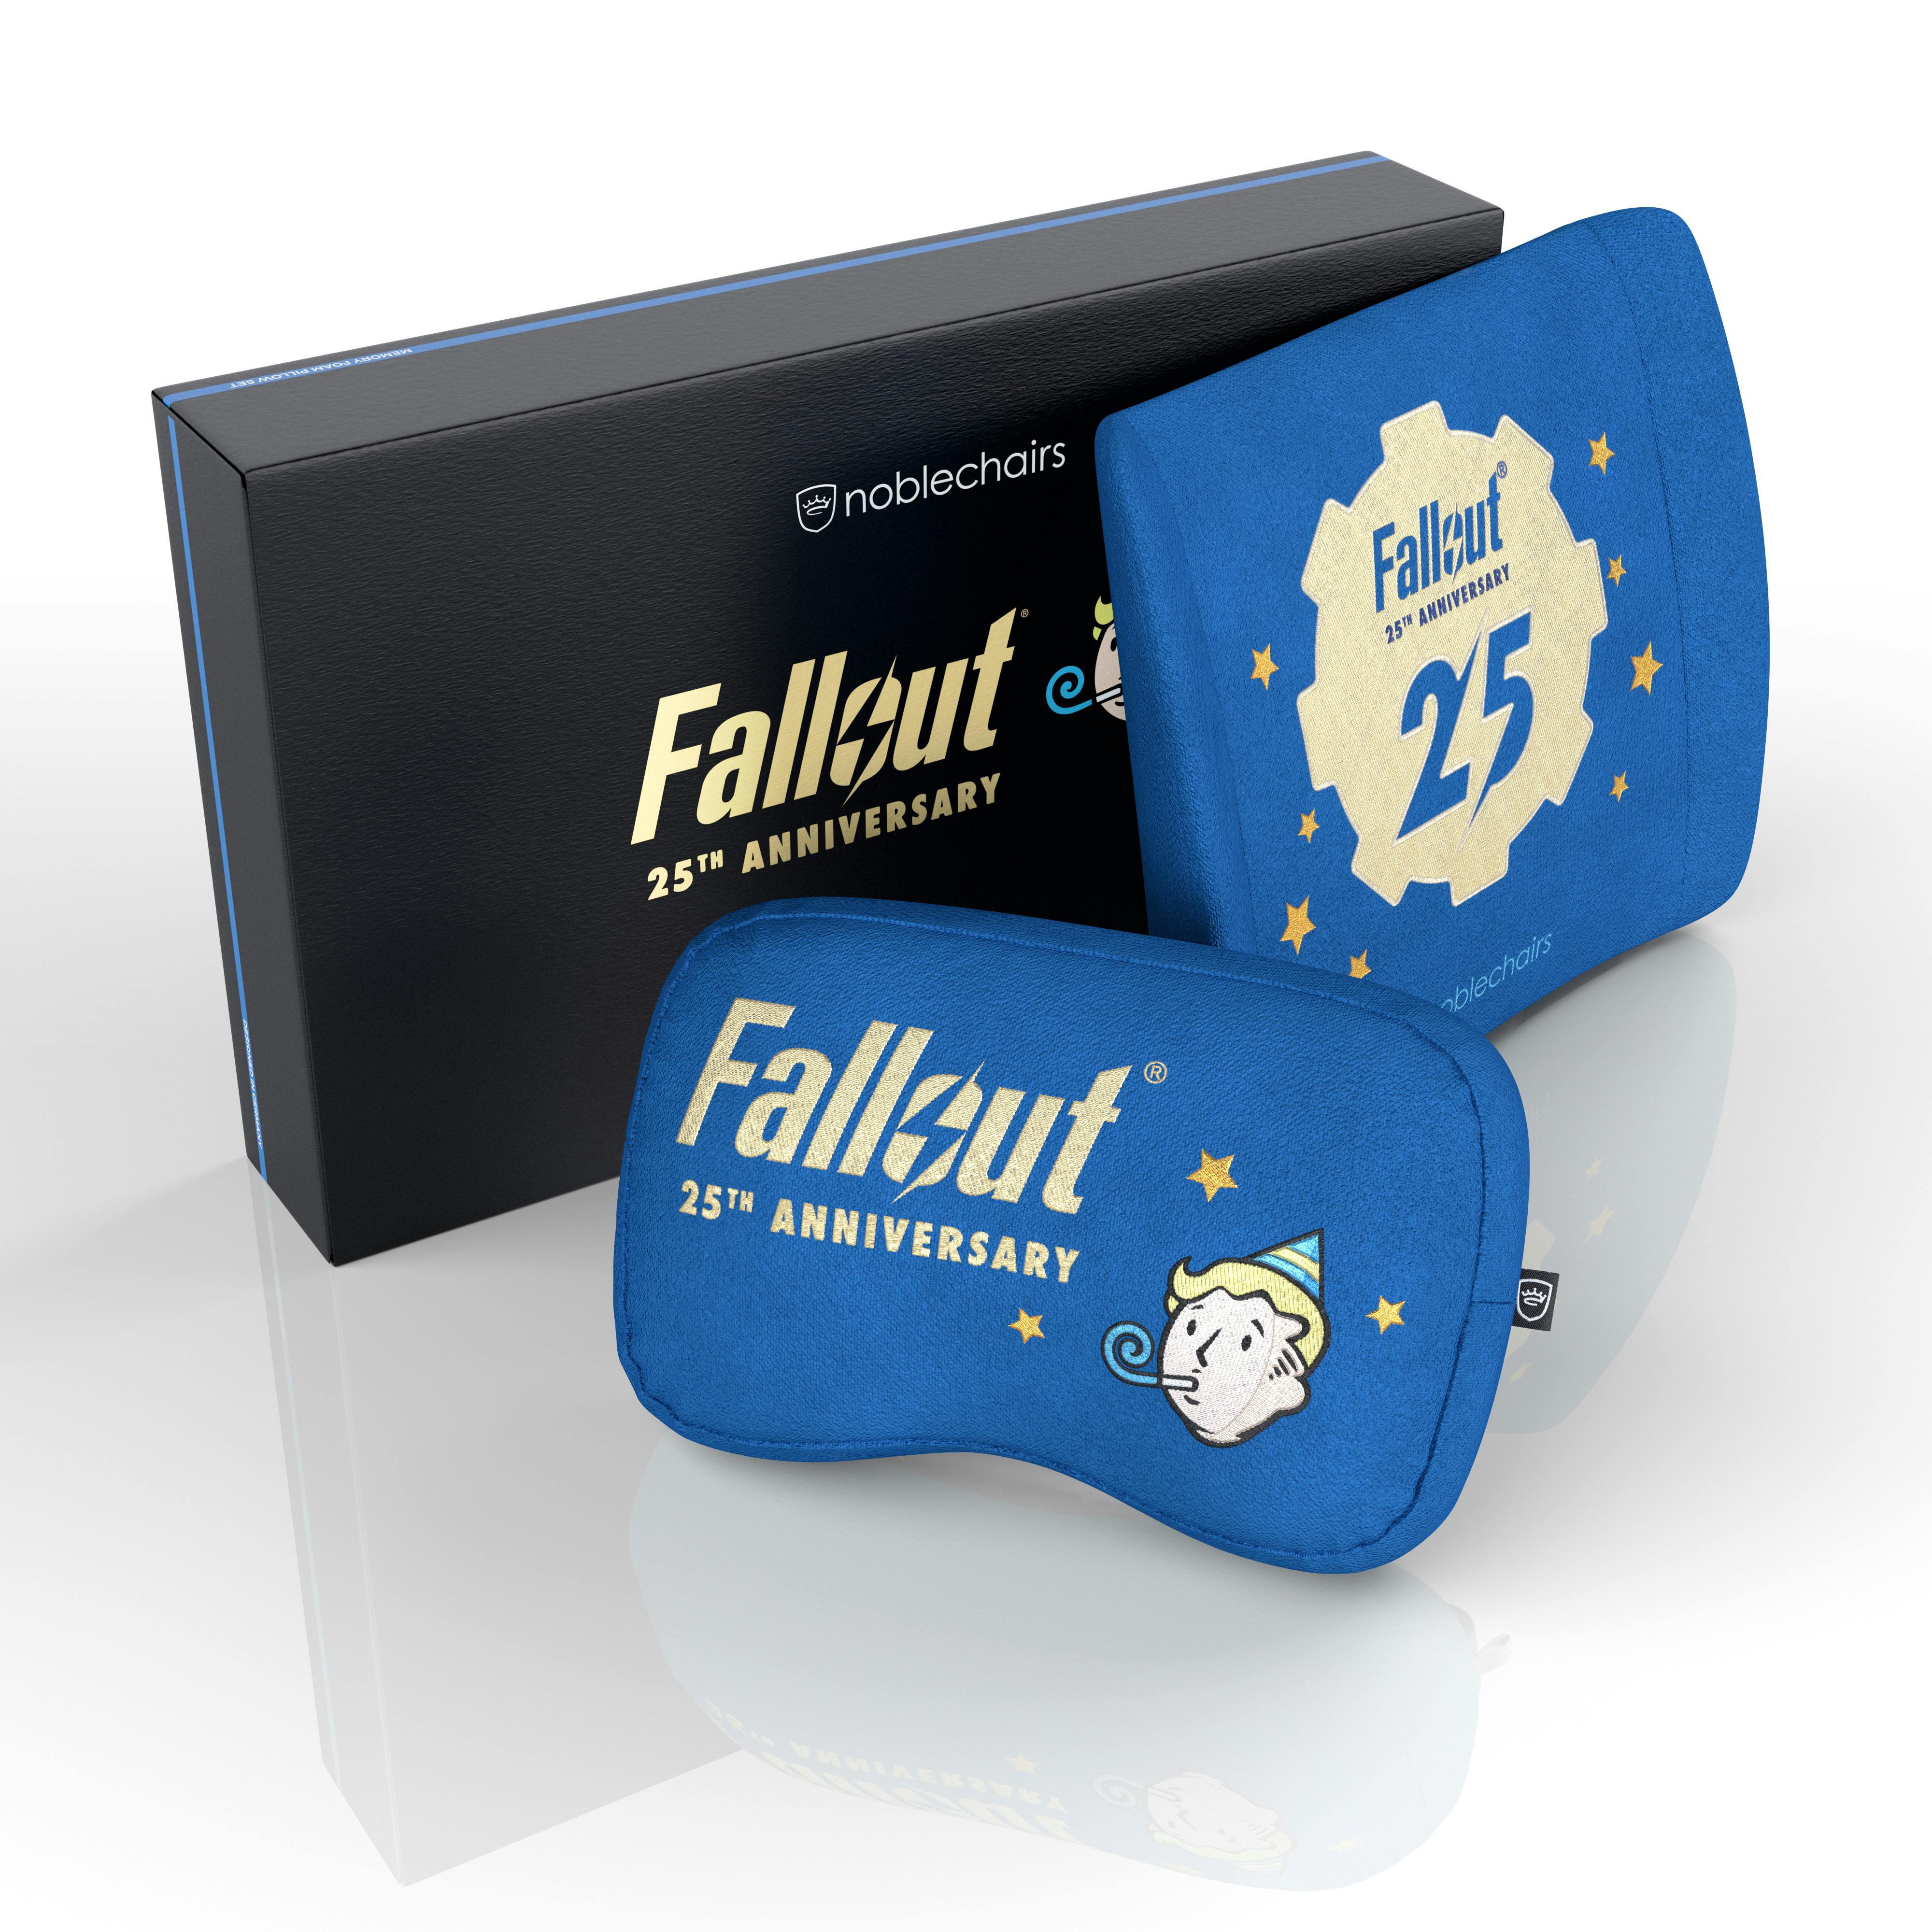 Fallout 25th Anniversary Edition Pillow Set